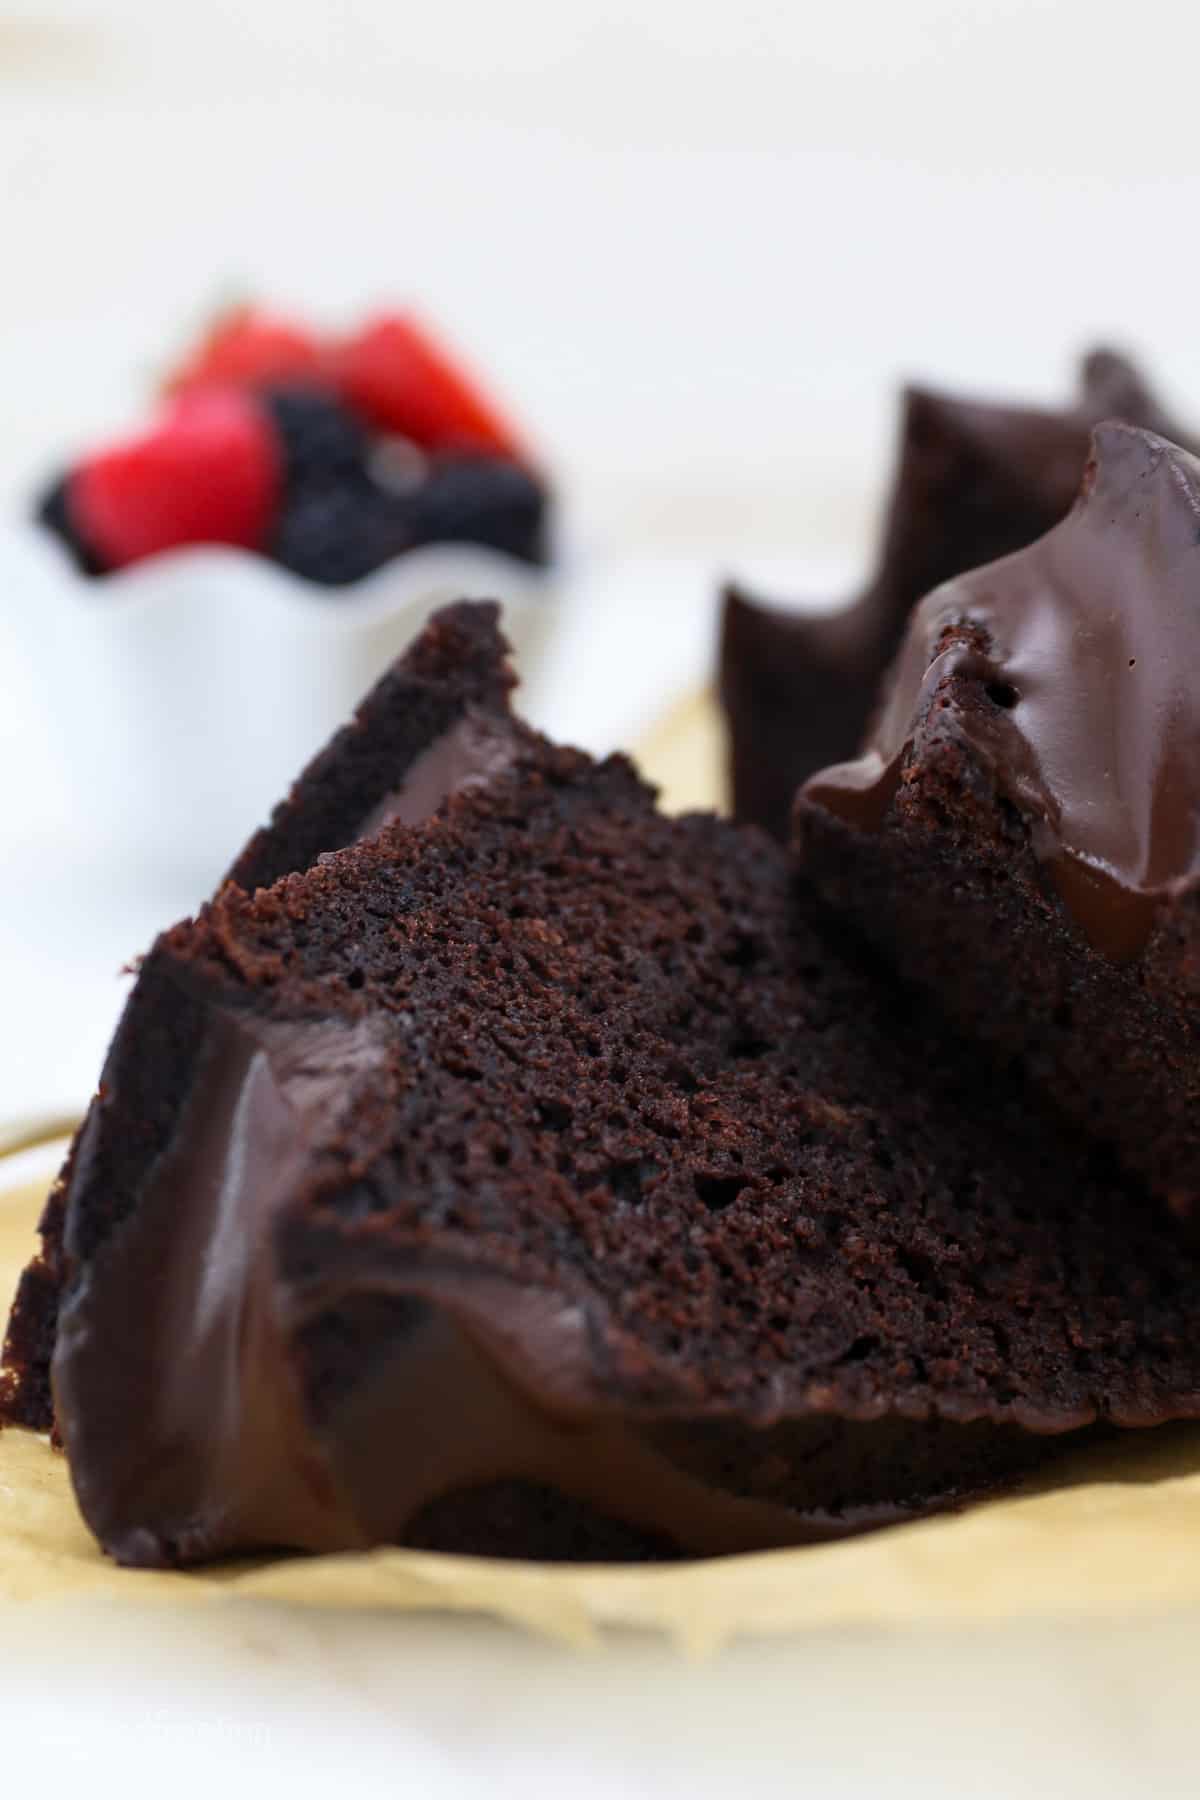 Close up of chocolate bundt cake cut into slices.